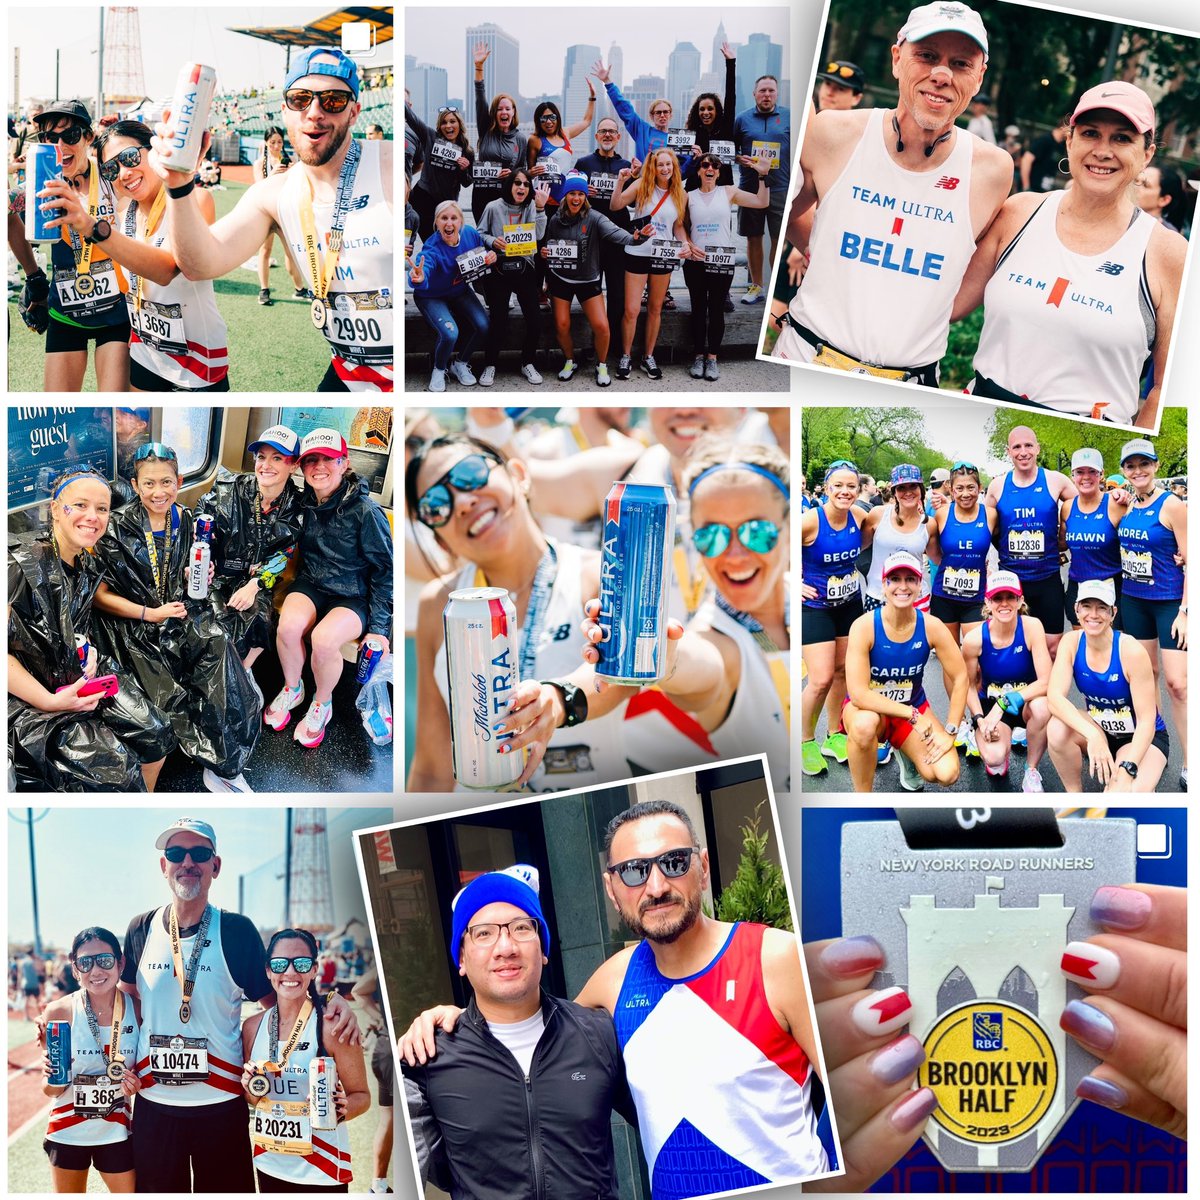 In just a week, @RunSuicidePace & I will be back in NYC for the Brooklyn Half Marathon with #TeamULTRA! 🎉 Though some won't be there this time, let's stay positive that @michelobultra will reunite us all this fall for the @nycmarathon.🤞#ULTRAMarathonGiveaway #Contest